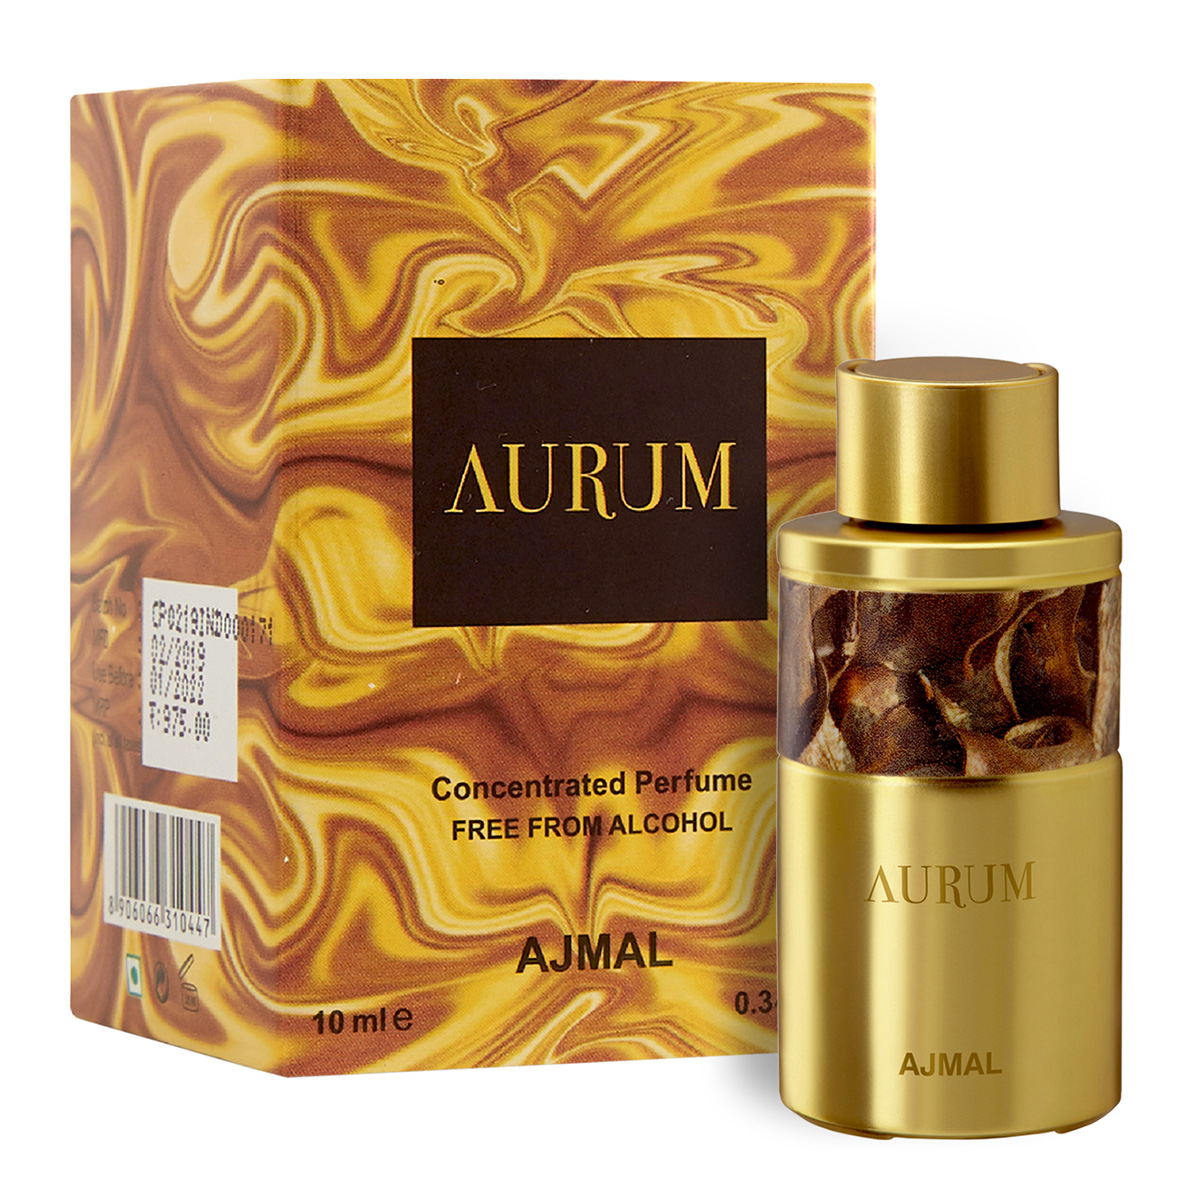 Ajmal Aurum Concentrated Fruity Perfume Free From Alcohol, 10ml